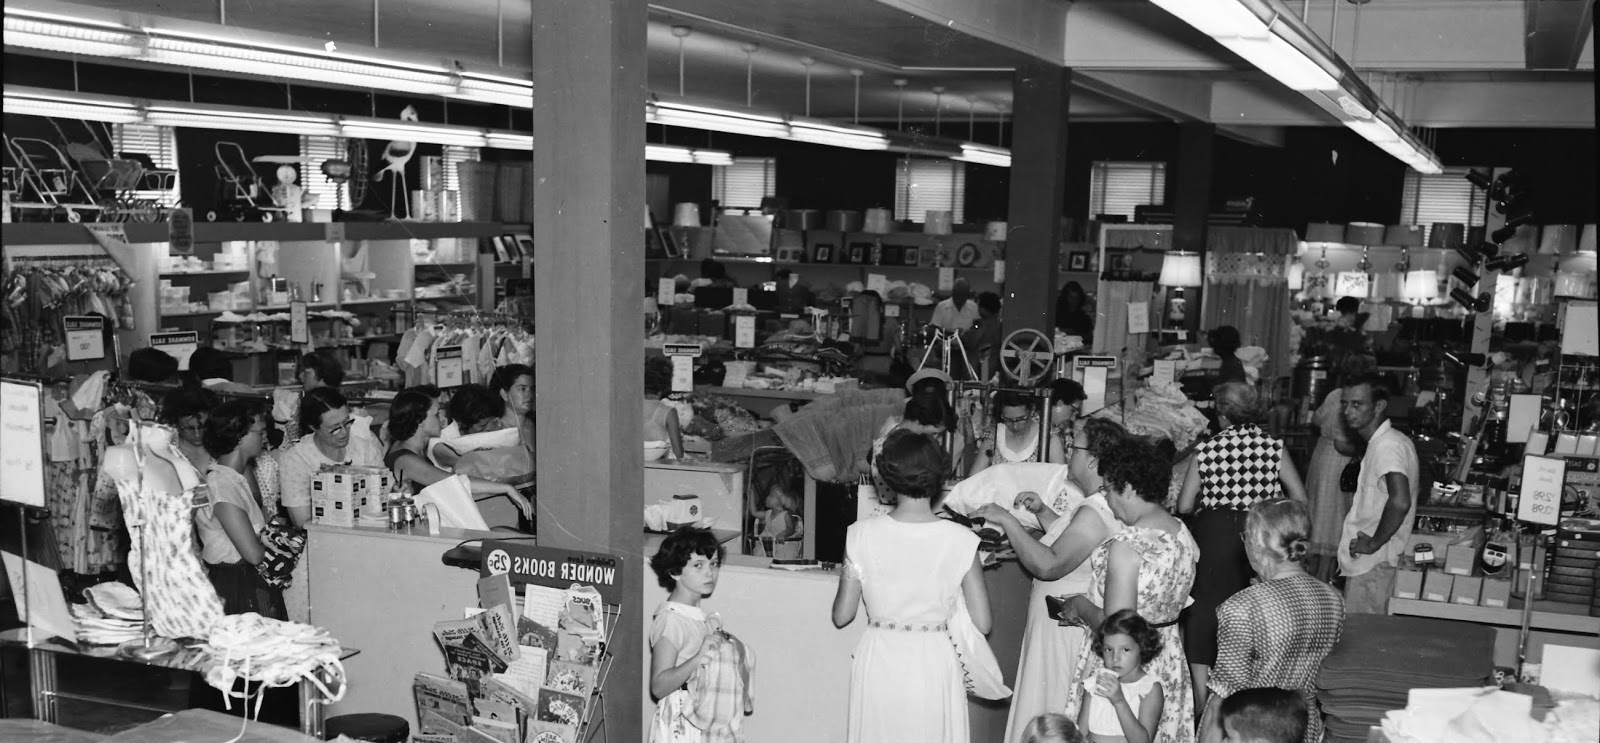 IMAGES OF OUR PAST - BELK MATTHEWS GRAND OPENING - 1950S, 101, 103, 105 ...